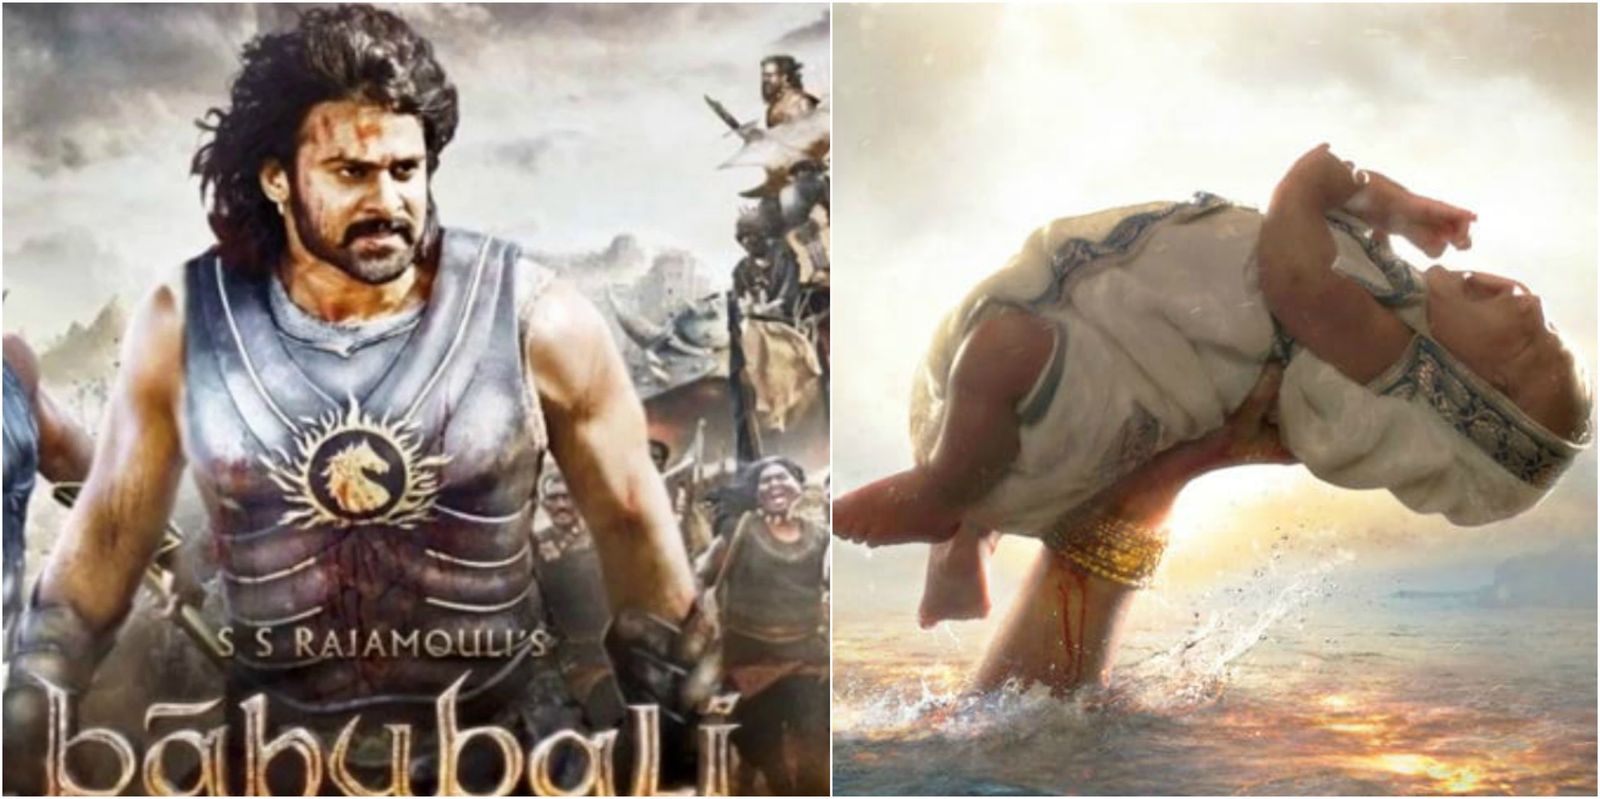 The Baby In The First Scene Of Baahubali: The Beginning Was Born To Play The Role, Quite Literally